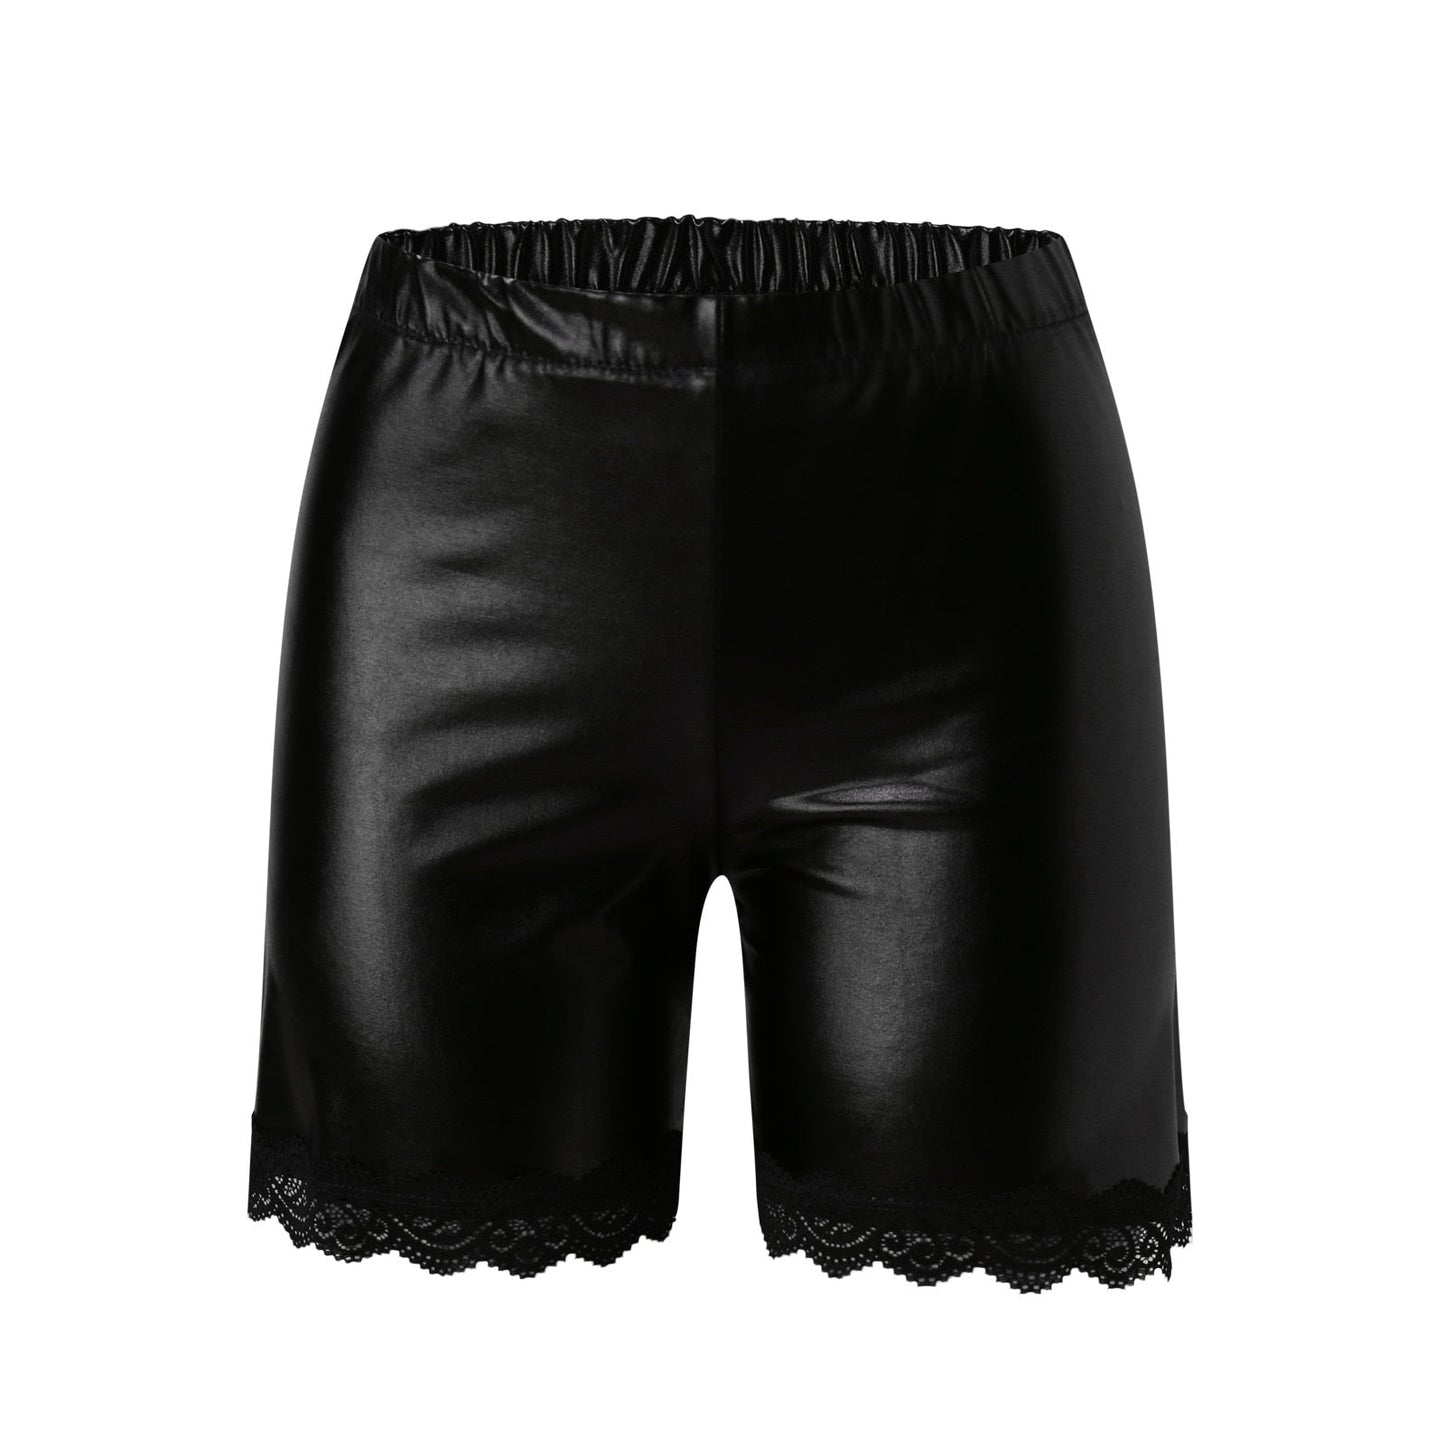 Sexy Lace Faux Leather Shorts